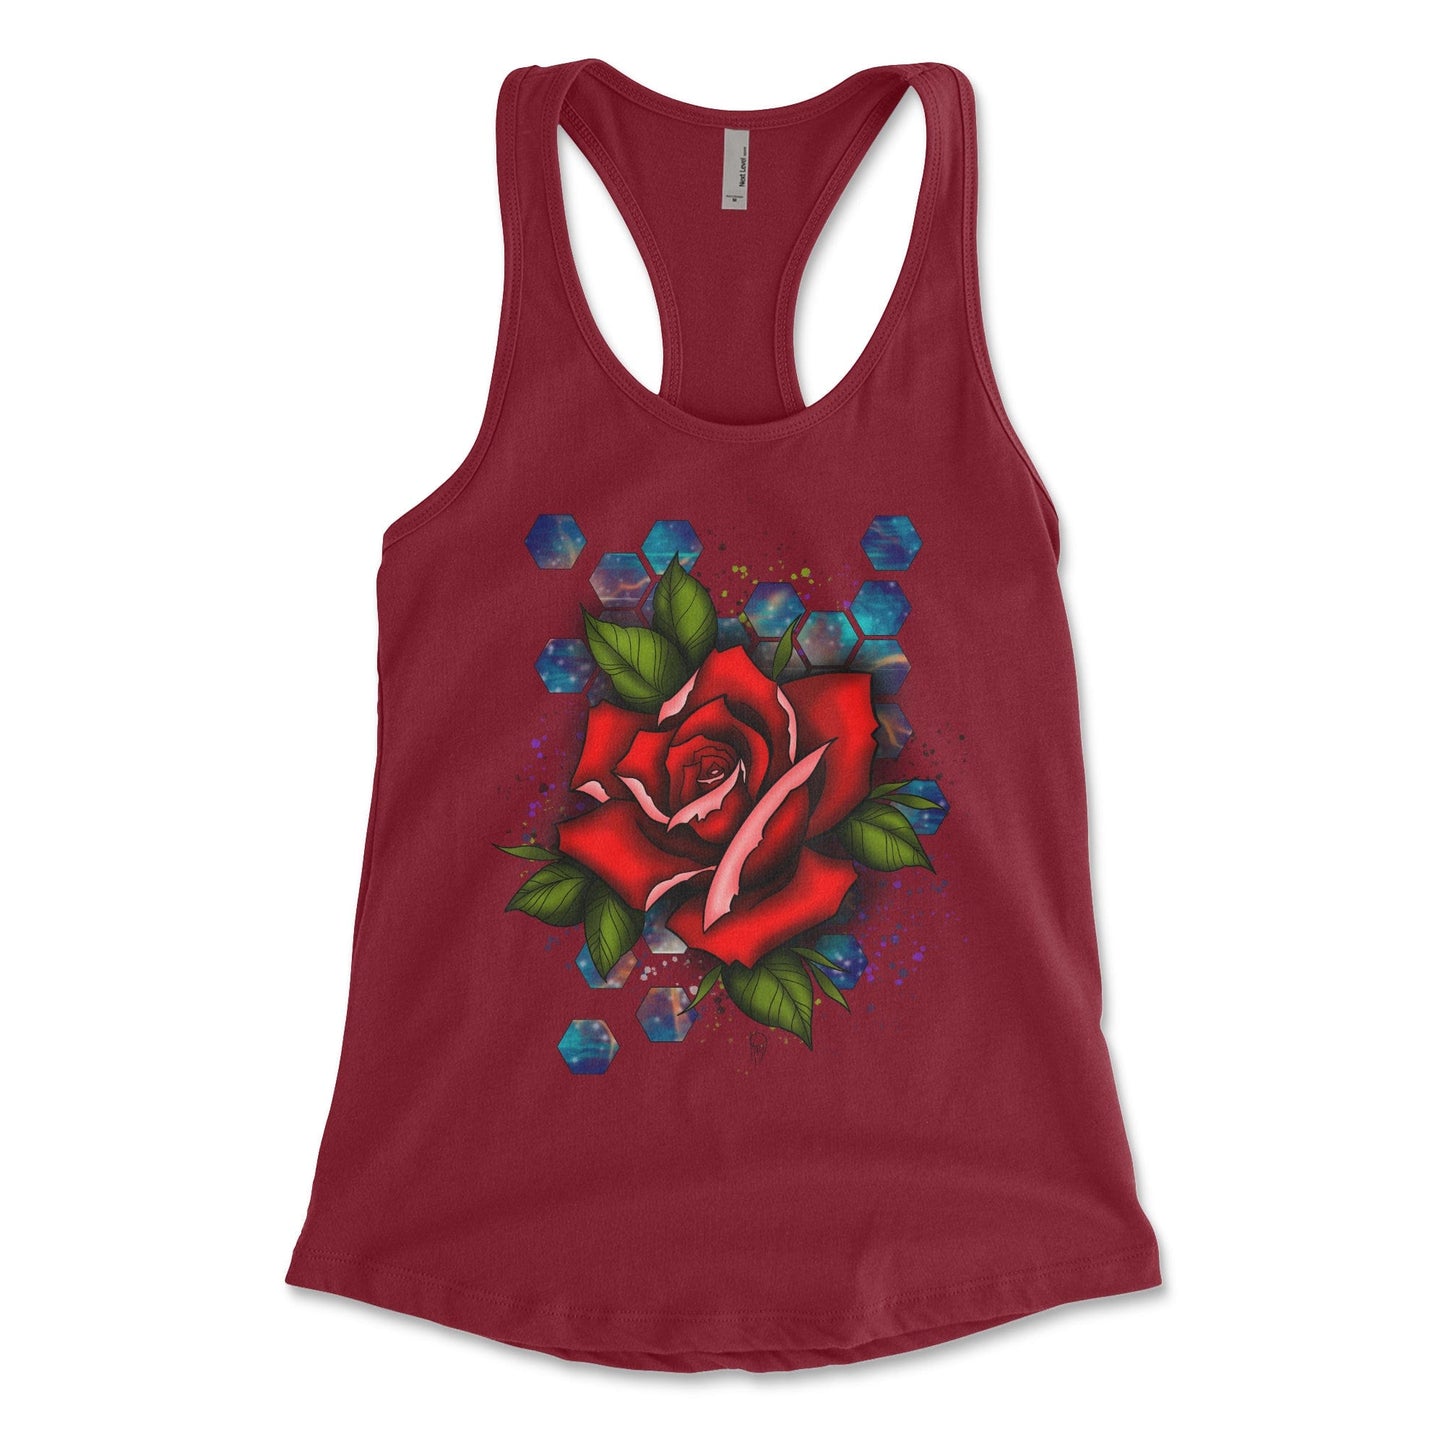 Legendary ltd. T SHIRT Rose and Stained Glass Tank by Kaylee